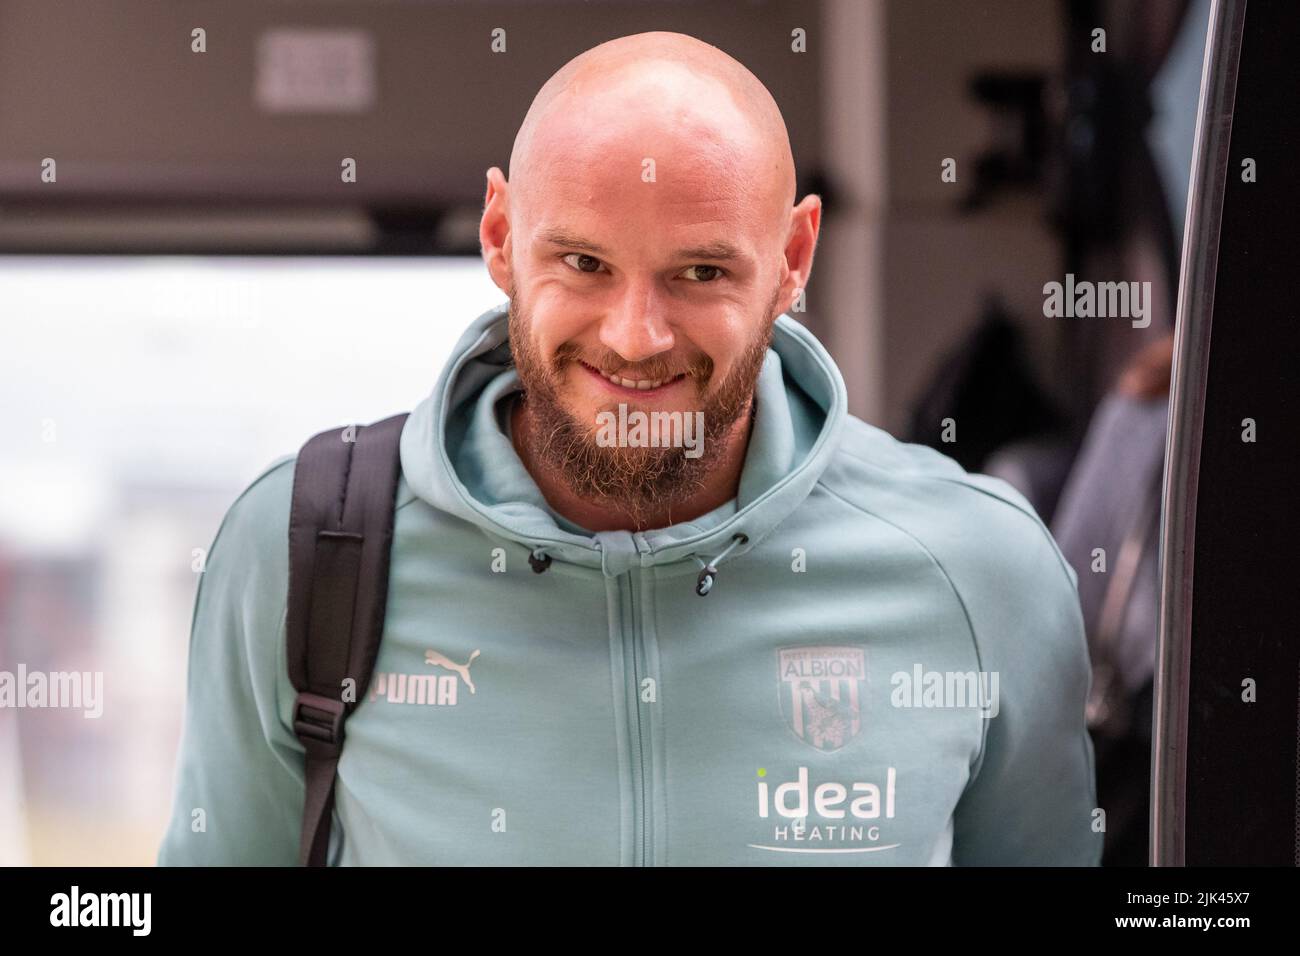 David Button #25 of West Bromwich Albion arrives at The Riverside Stadium ahead of this evening's game Stock Photo